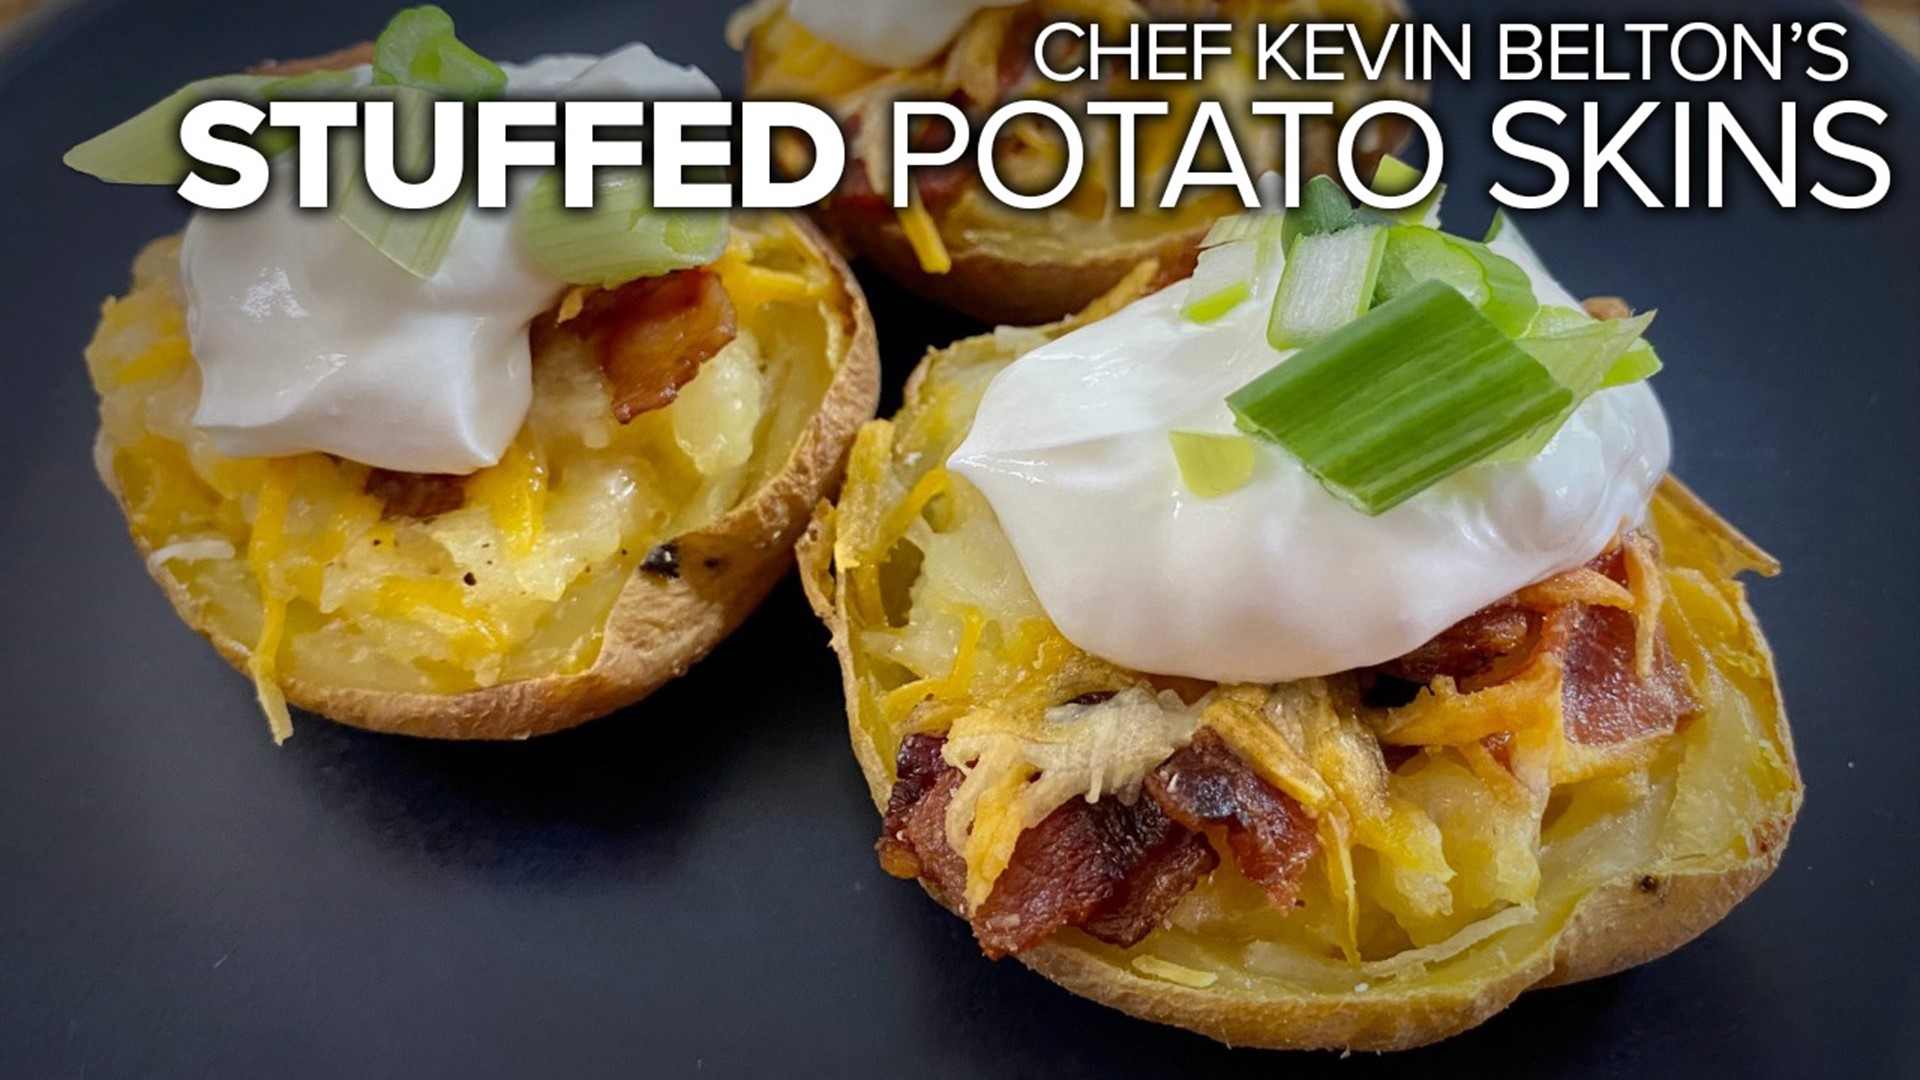 If you love potatoes as much as I do, this is another great way to enjoy them!